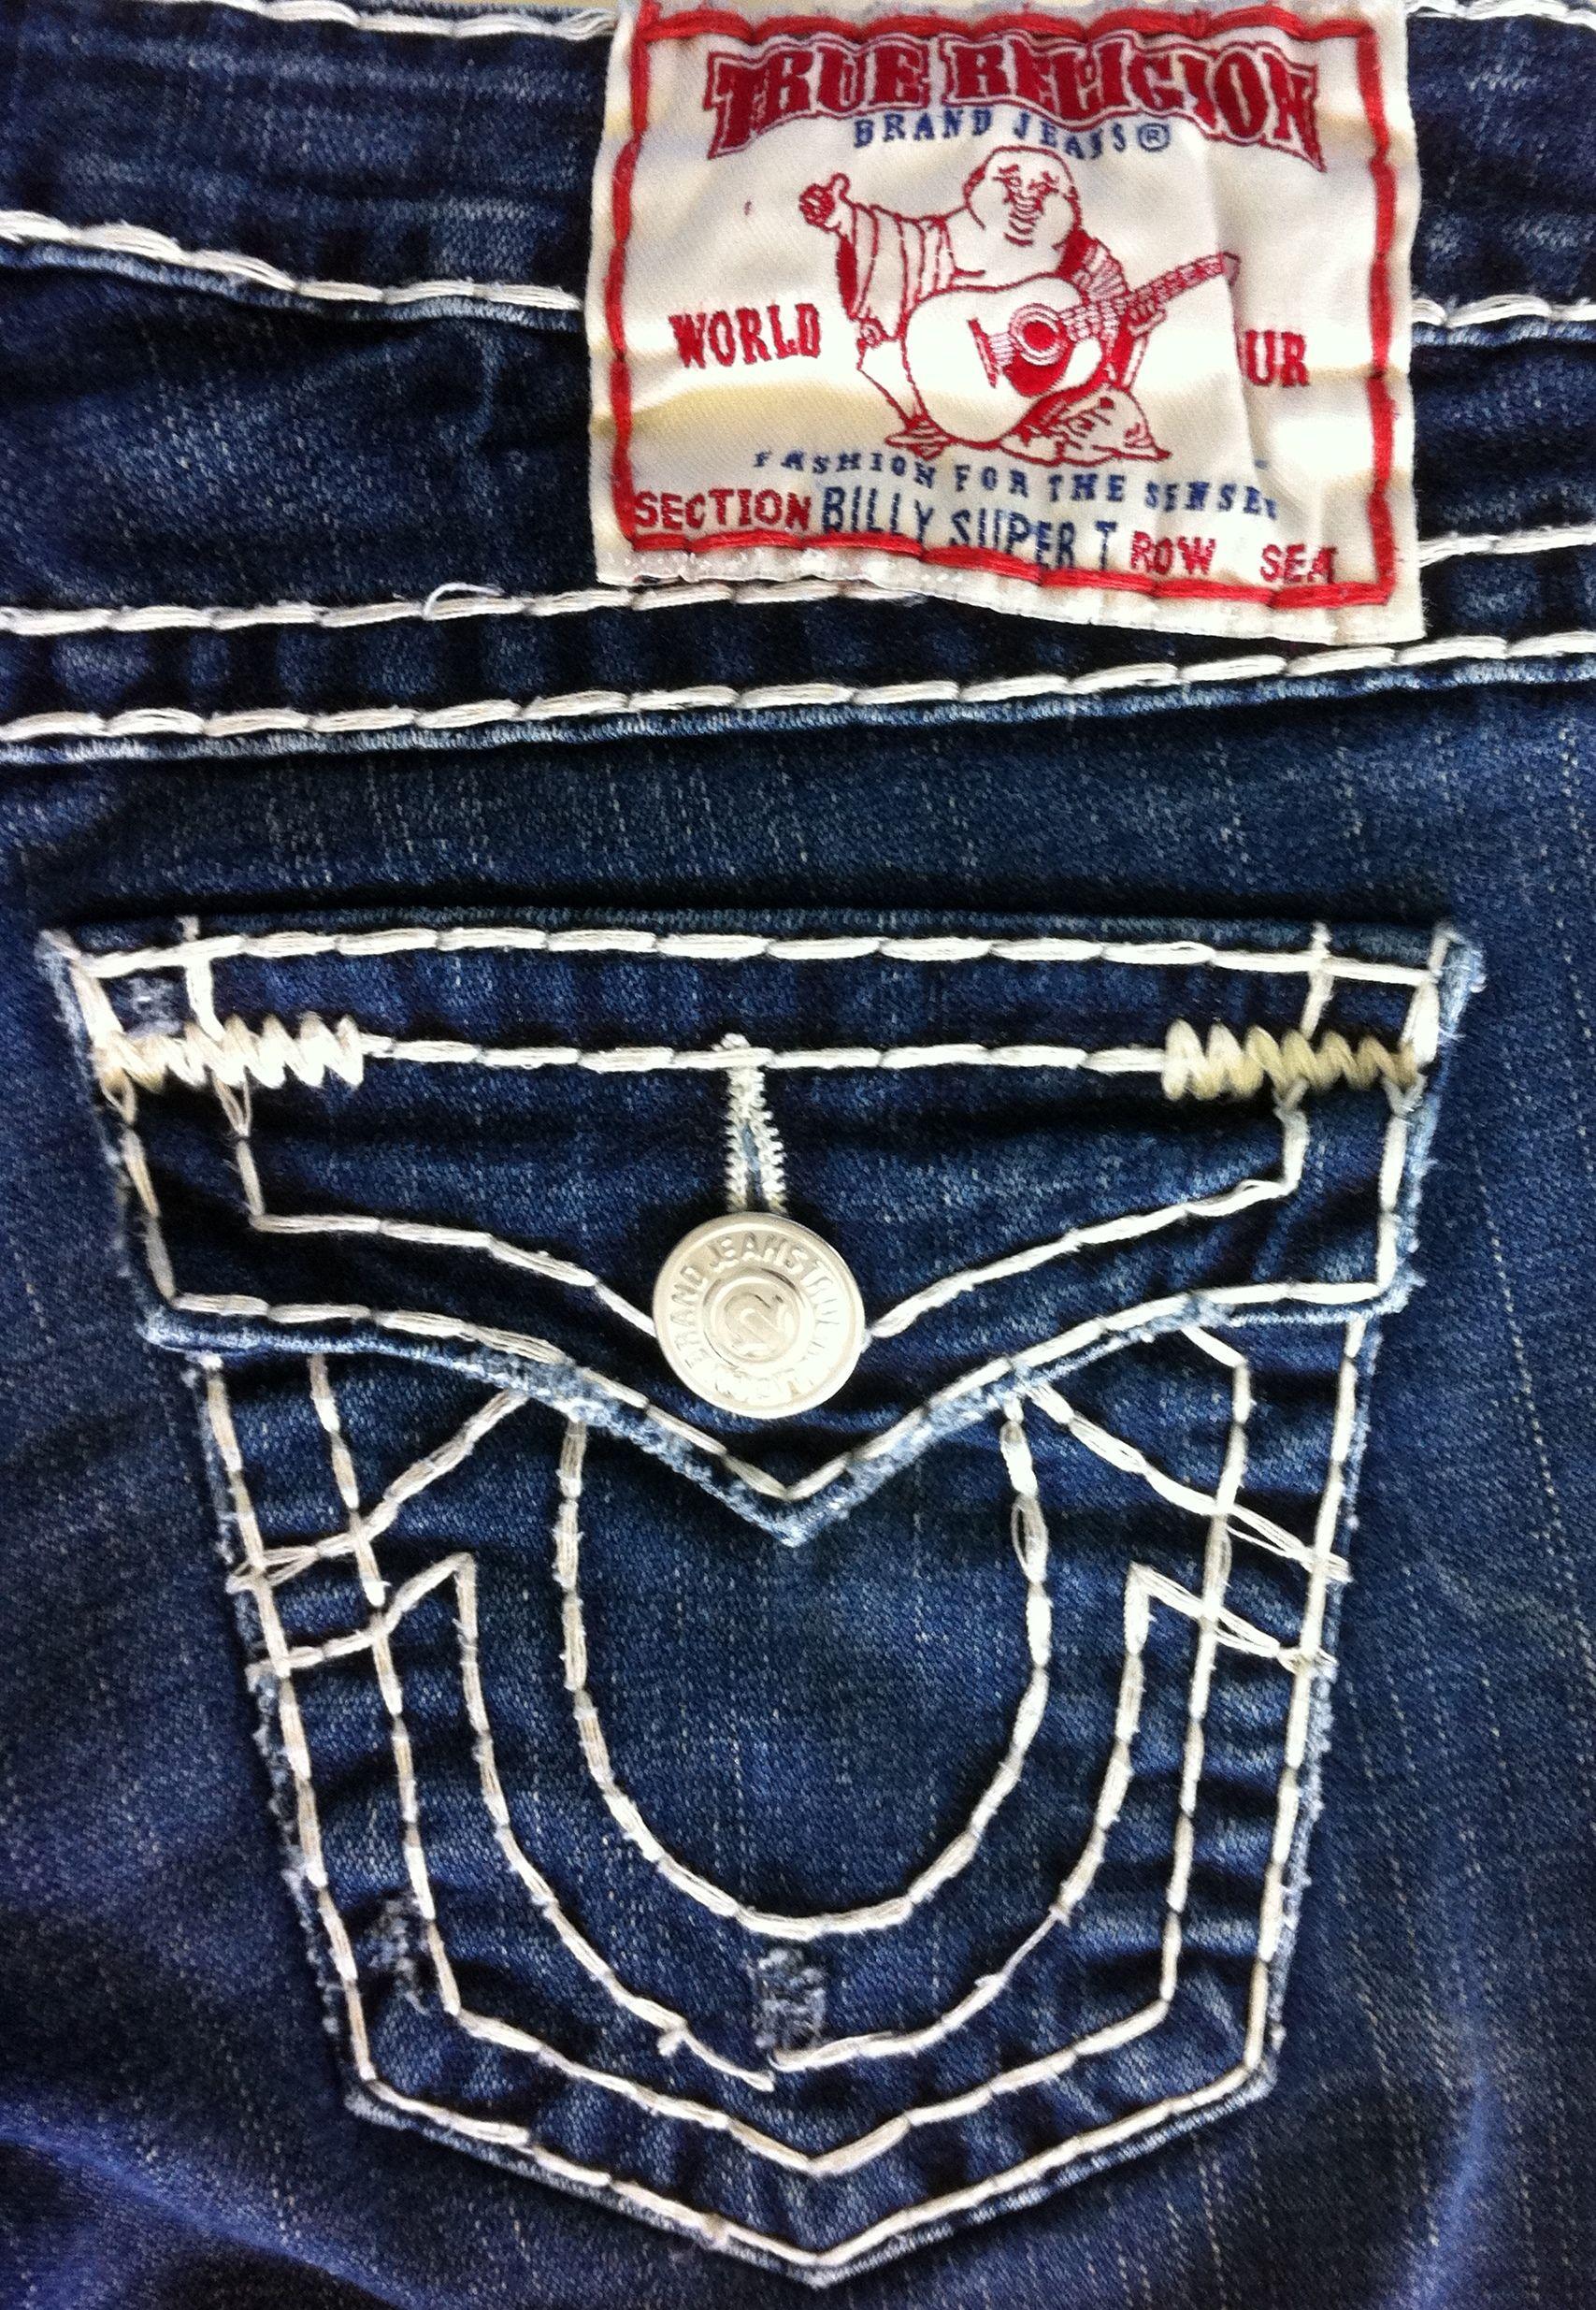 True Religion Jeans Logo - True Religion Jeans - Only $47.99 At Meta Exchange in Baton Rouge!